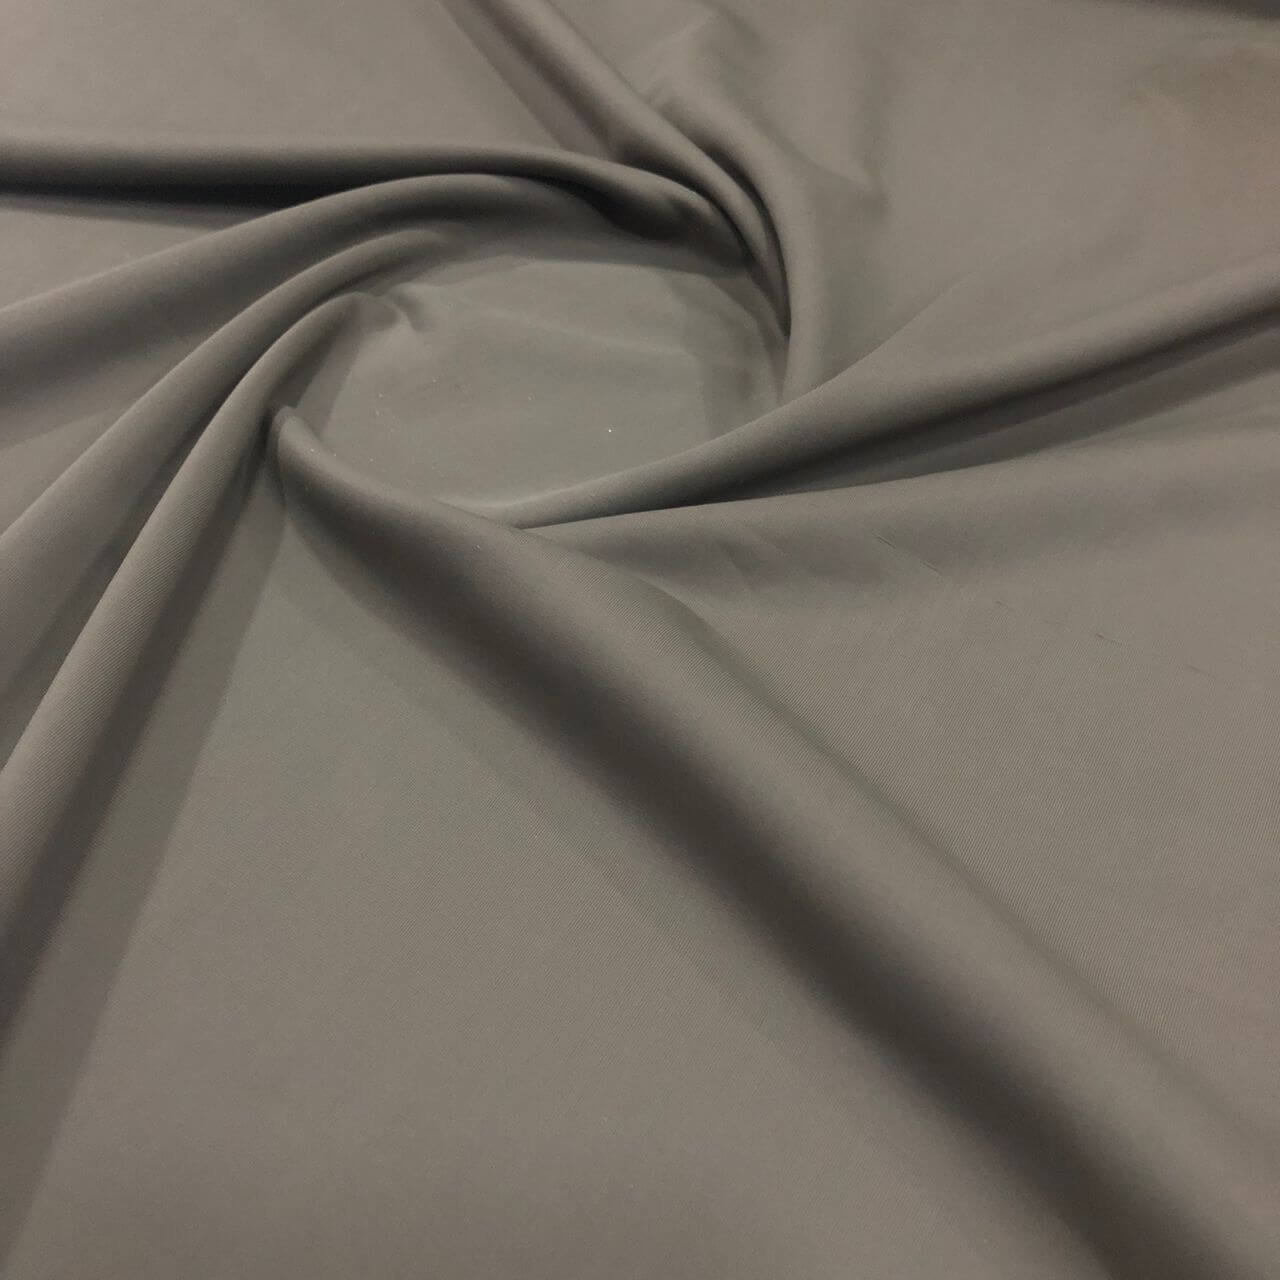 Premium White Solid Colors Nylon Spandex Fabric 4-Way Stretch 60 wide By  Yard